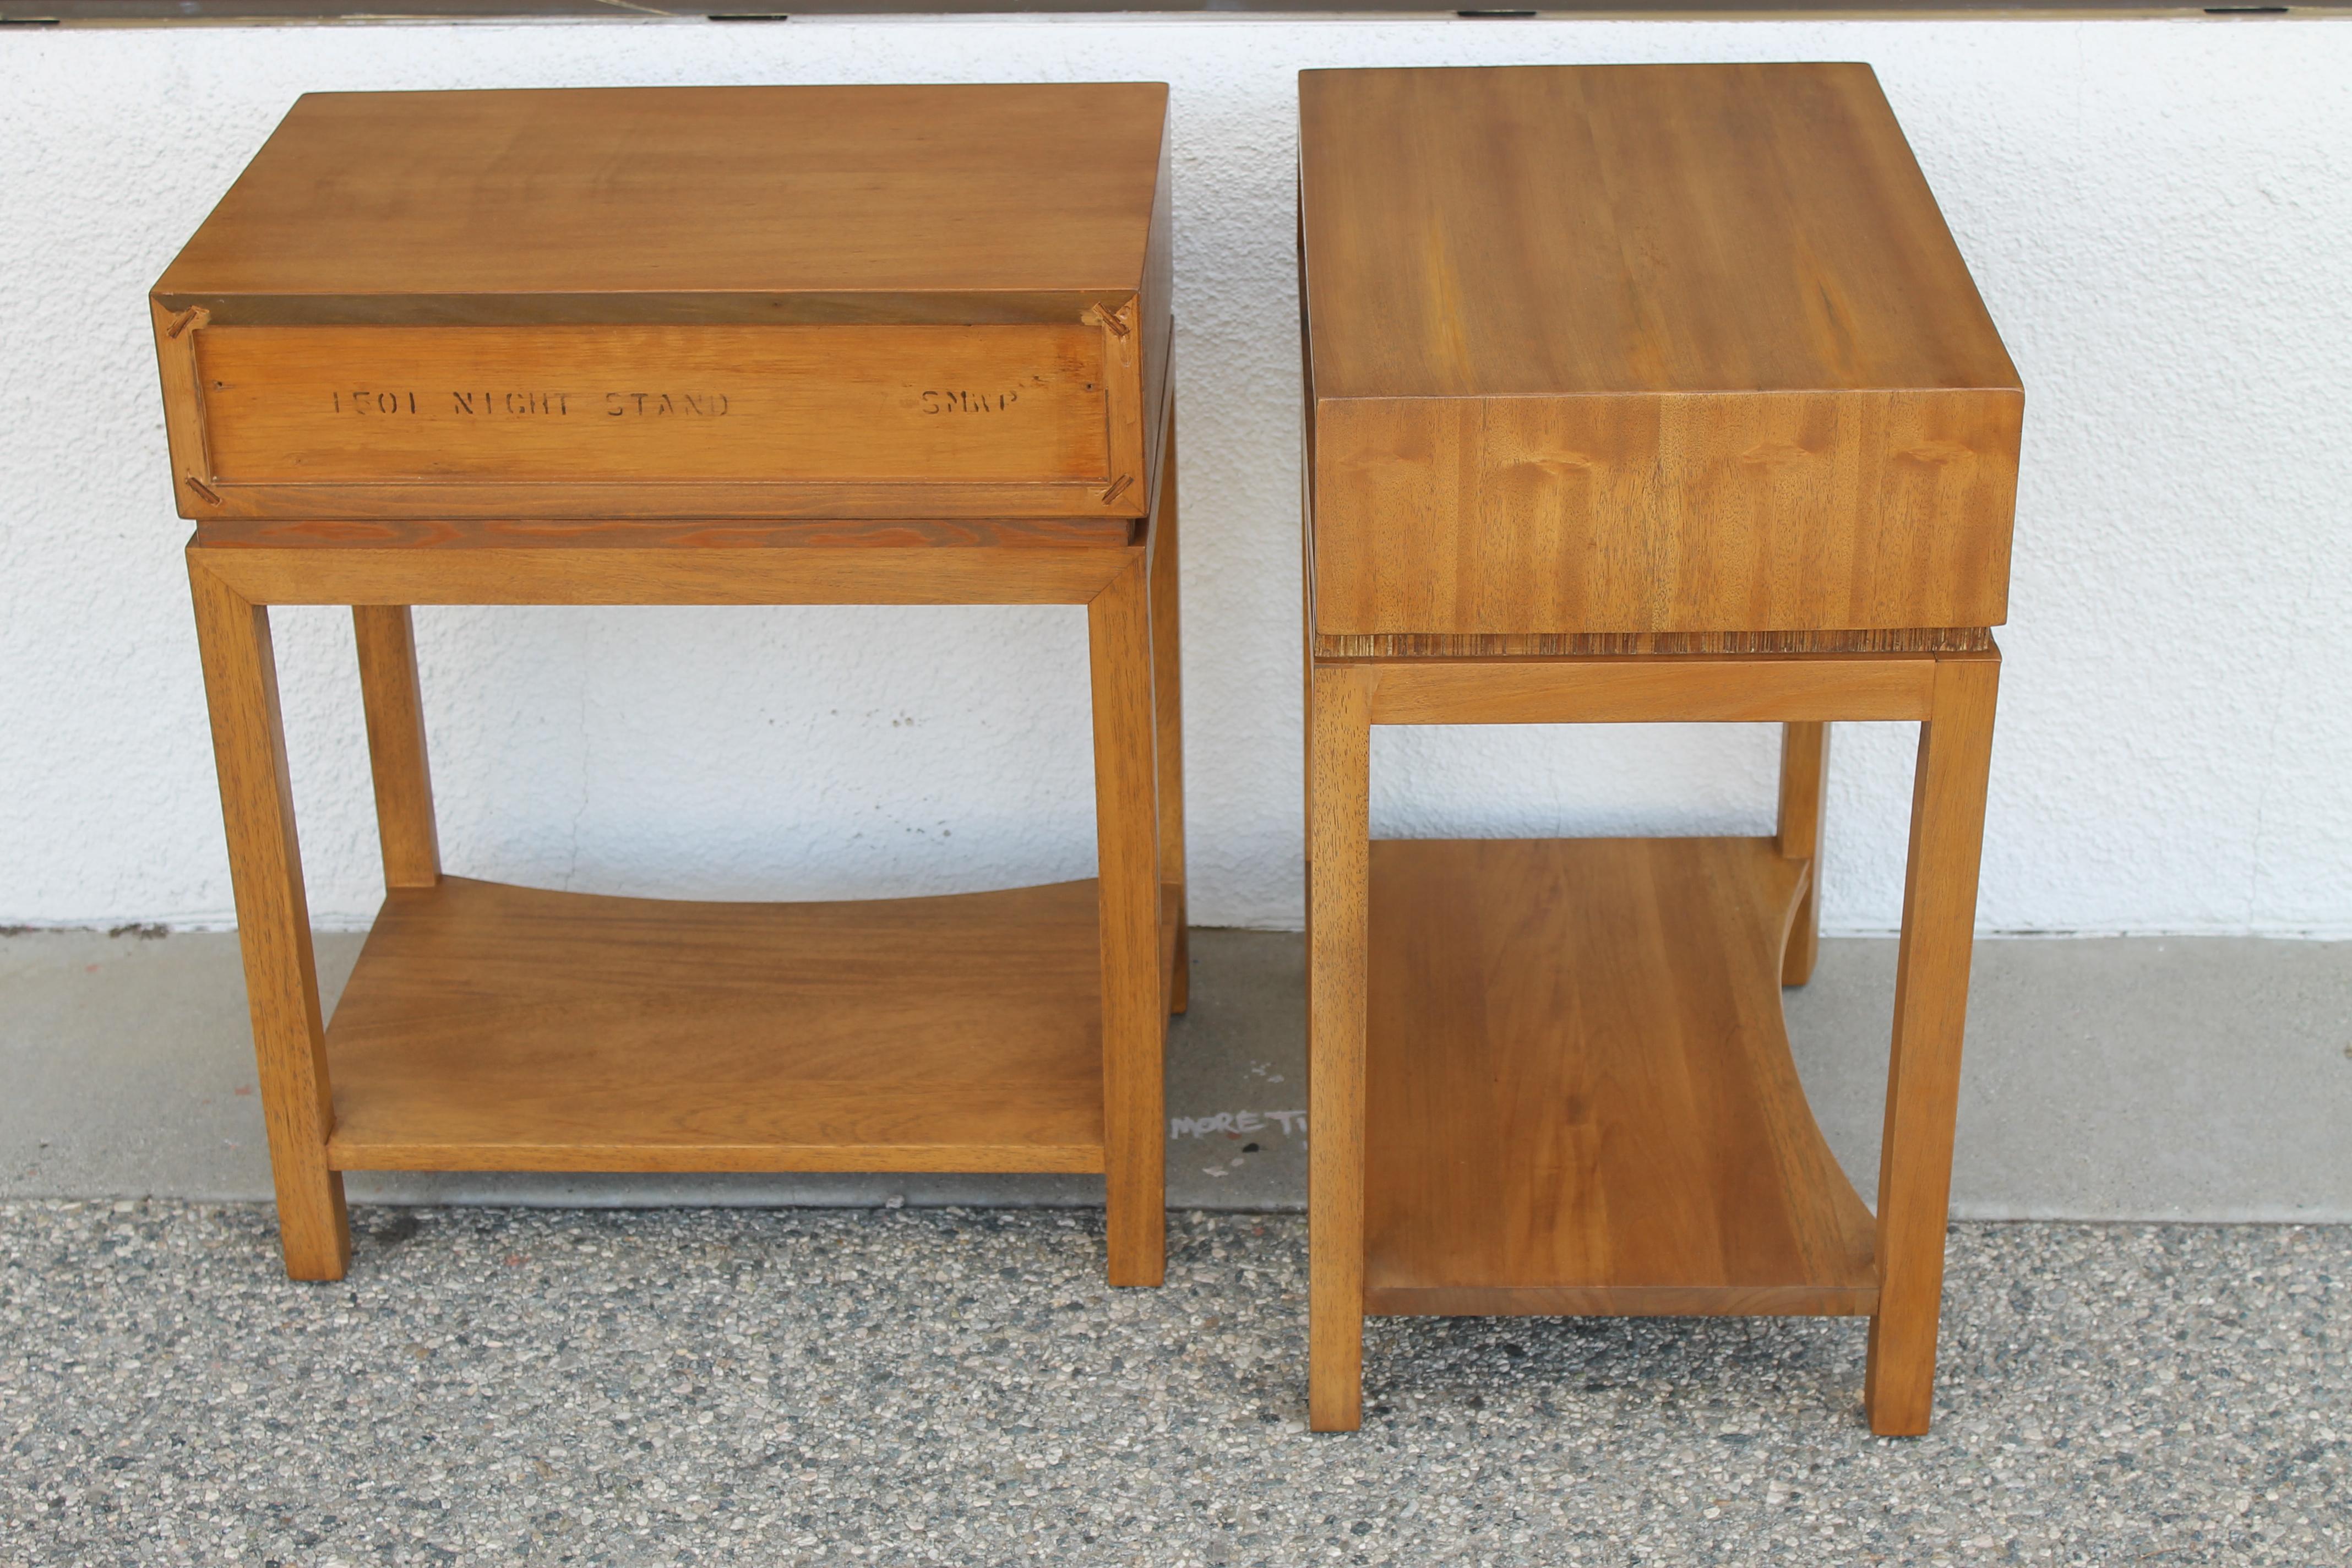 Pair of end tables by Paul Frankl for Brown Saltman of California with brass pulls. Tables have been professionally refinished. Each side table measures 20